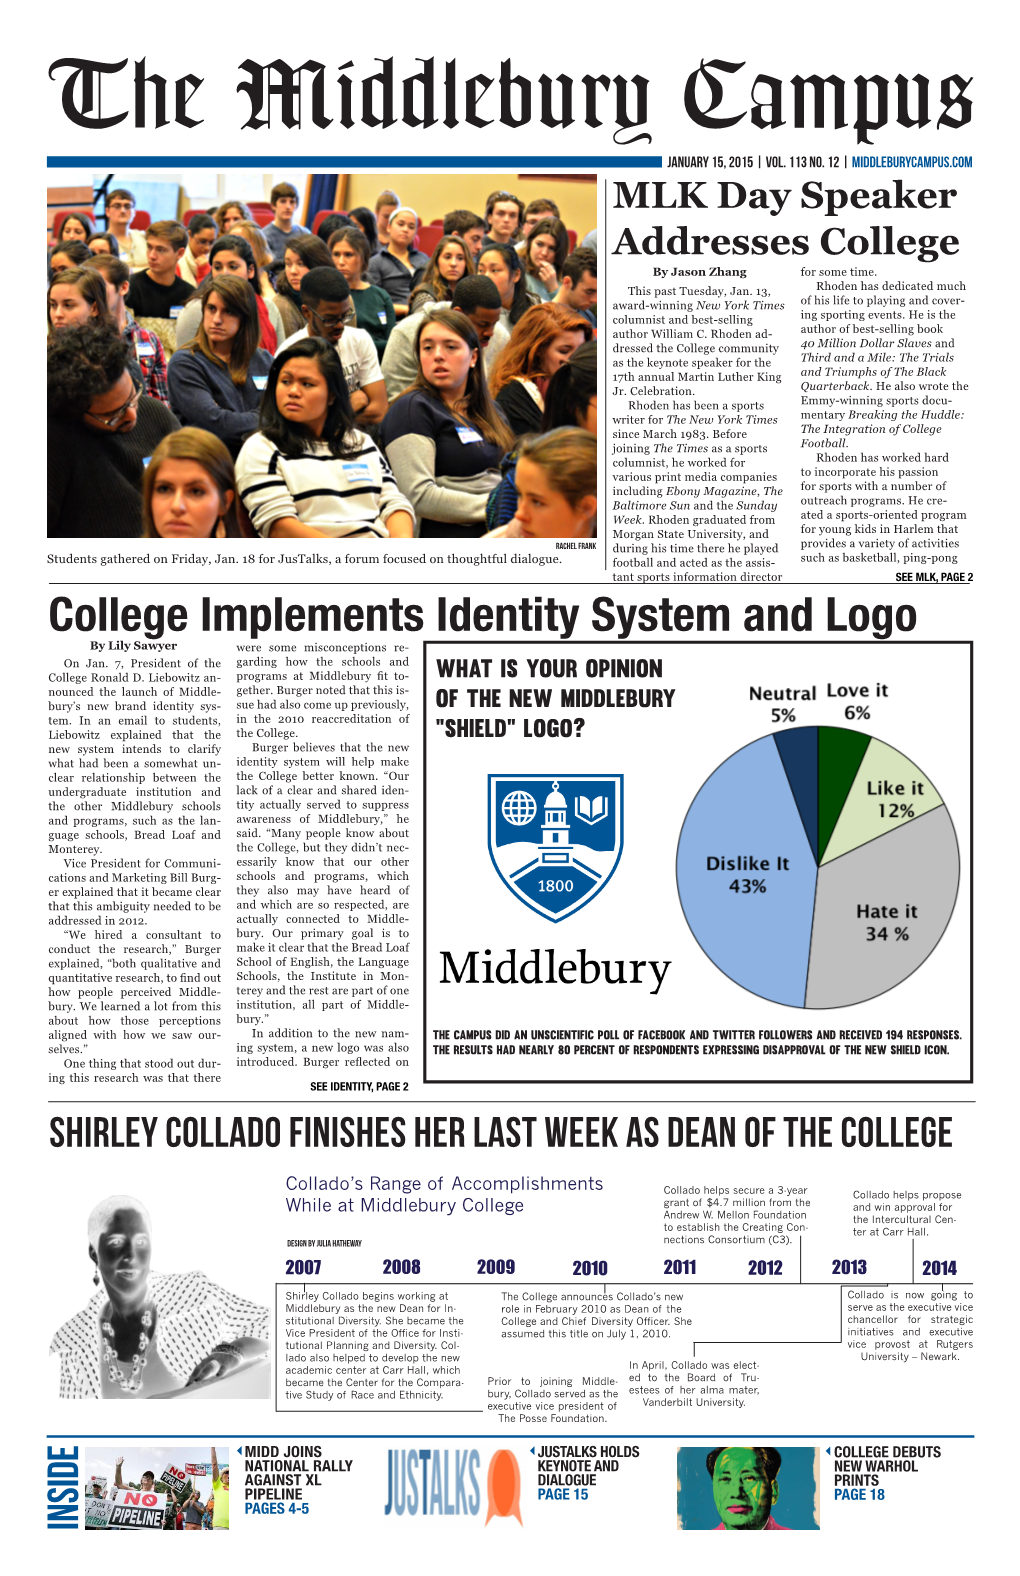 College Implements Identity System and Logo by Lily Sawyer Were Some Misconceptions Re- on Jan